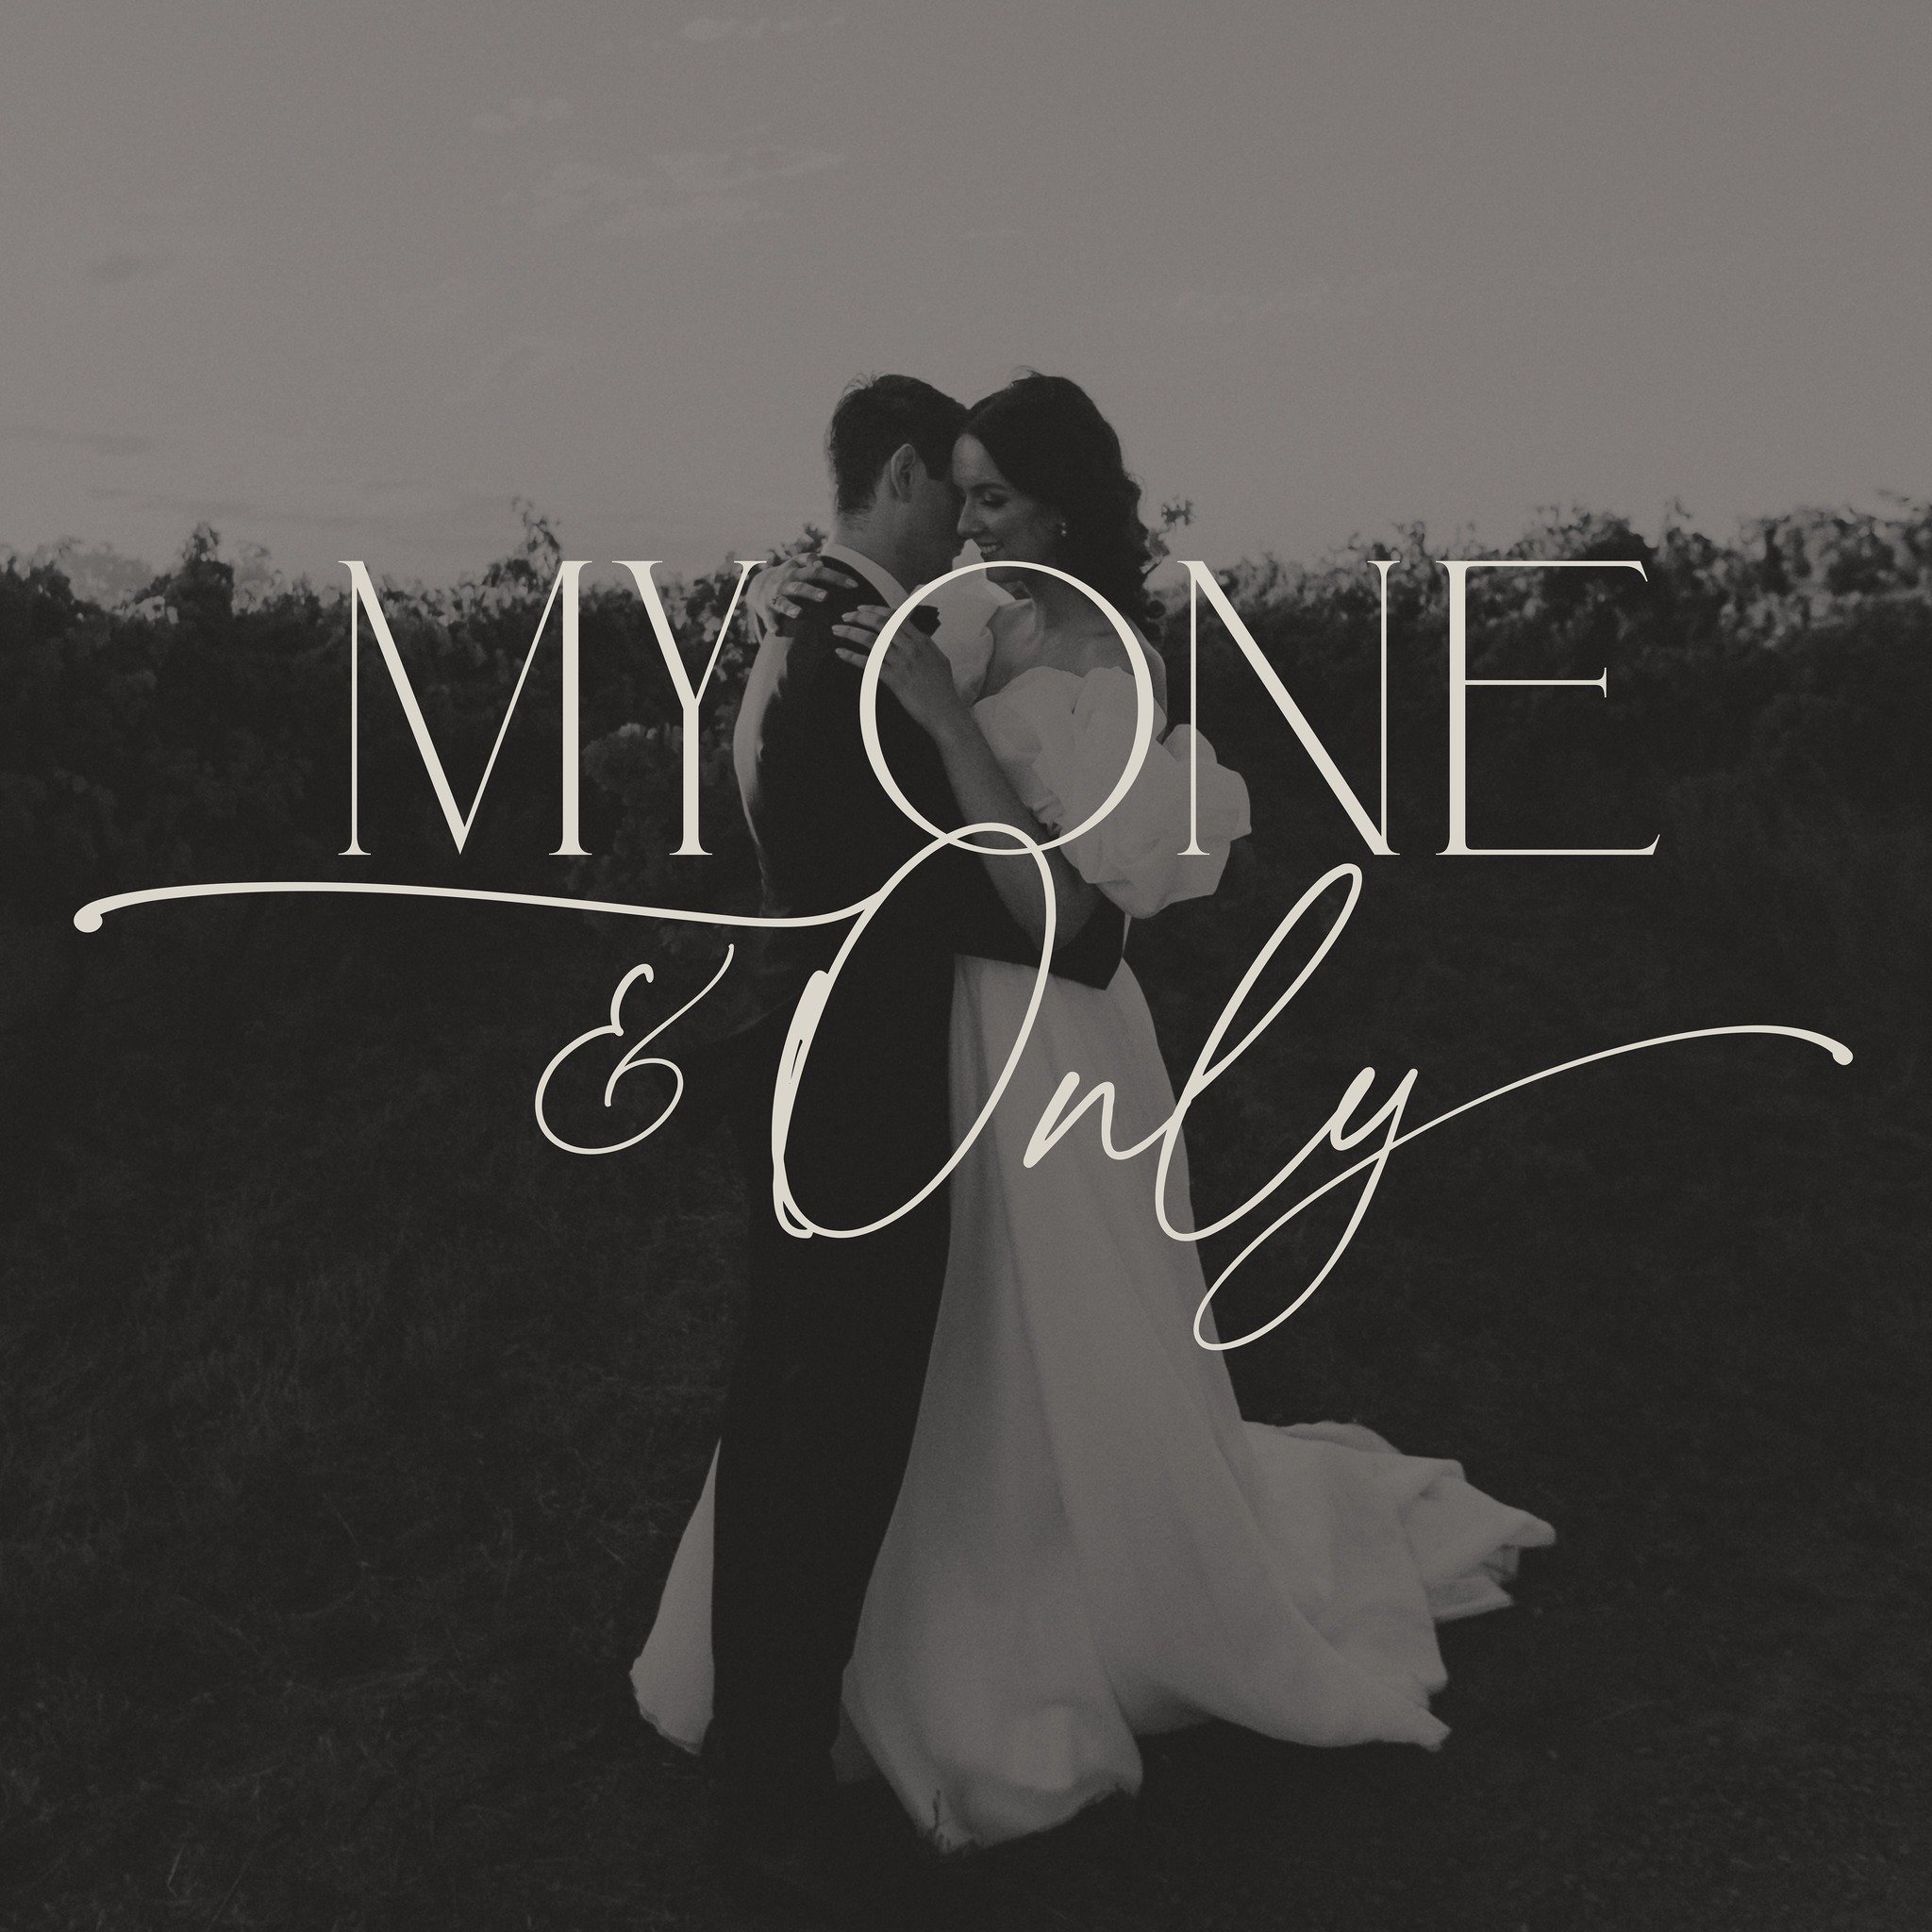 After 7 years it was time for a little facelift. Johnst Creative is now &lsquo;My One &amp; Only&rsquo;. 

Thank you to everyone who has supported us over the years. We look forward to capturing many more beautiful memories together. 

We would so ap